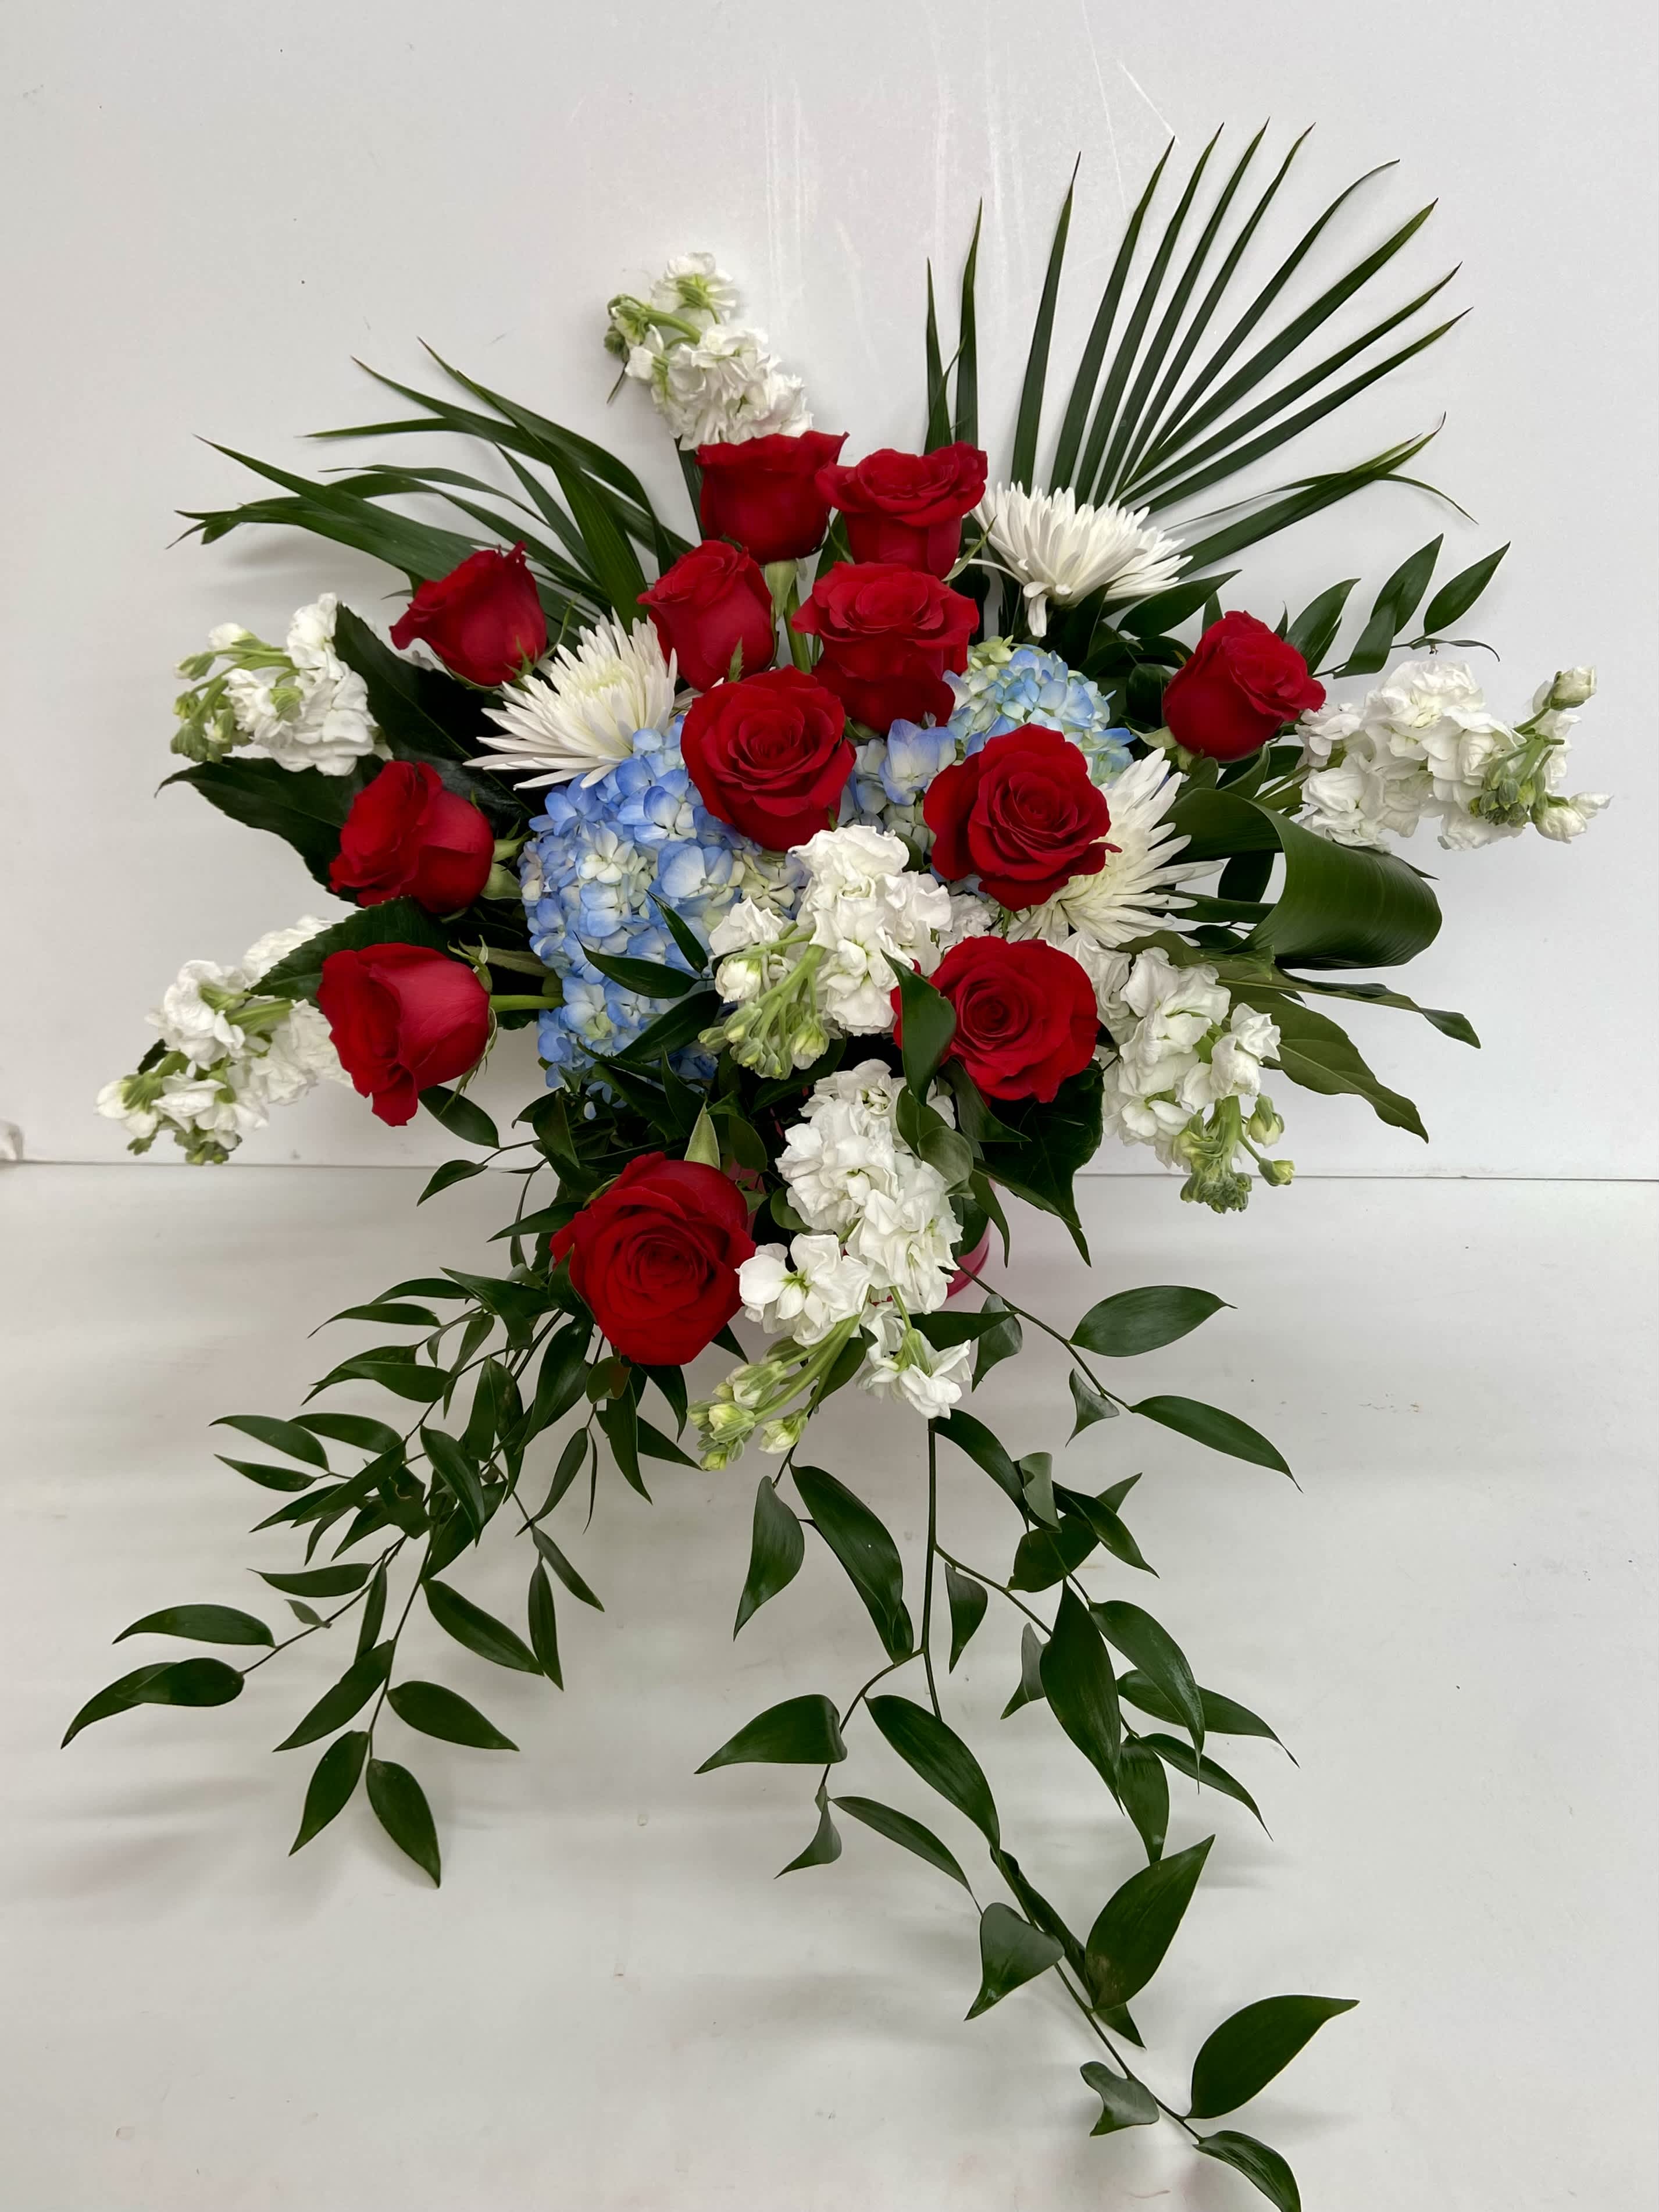 Sacred  Heart Bouquet - Standing proud and patriotic, this dazzling  display made of graceful flowers. Uniquely beautiful, it's a lovely way to honor a great loss. 